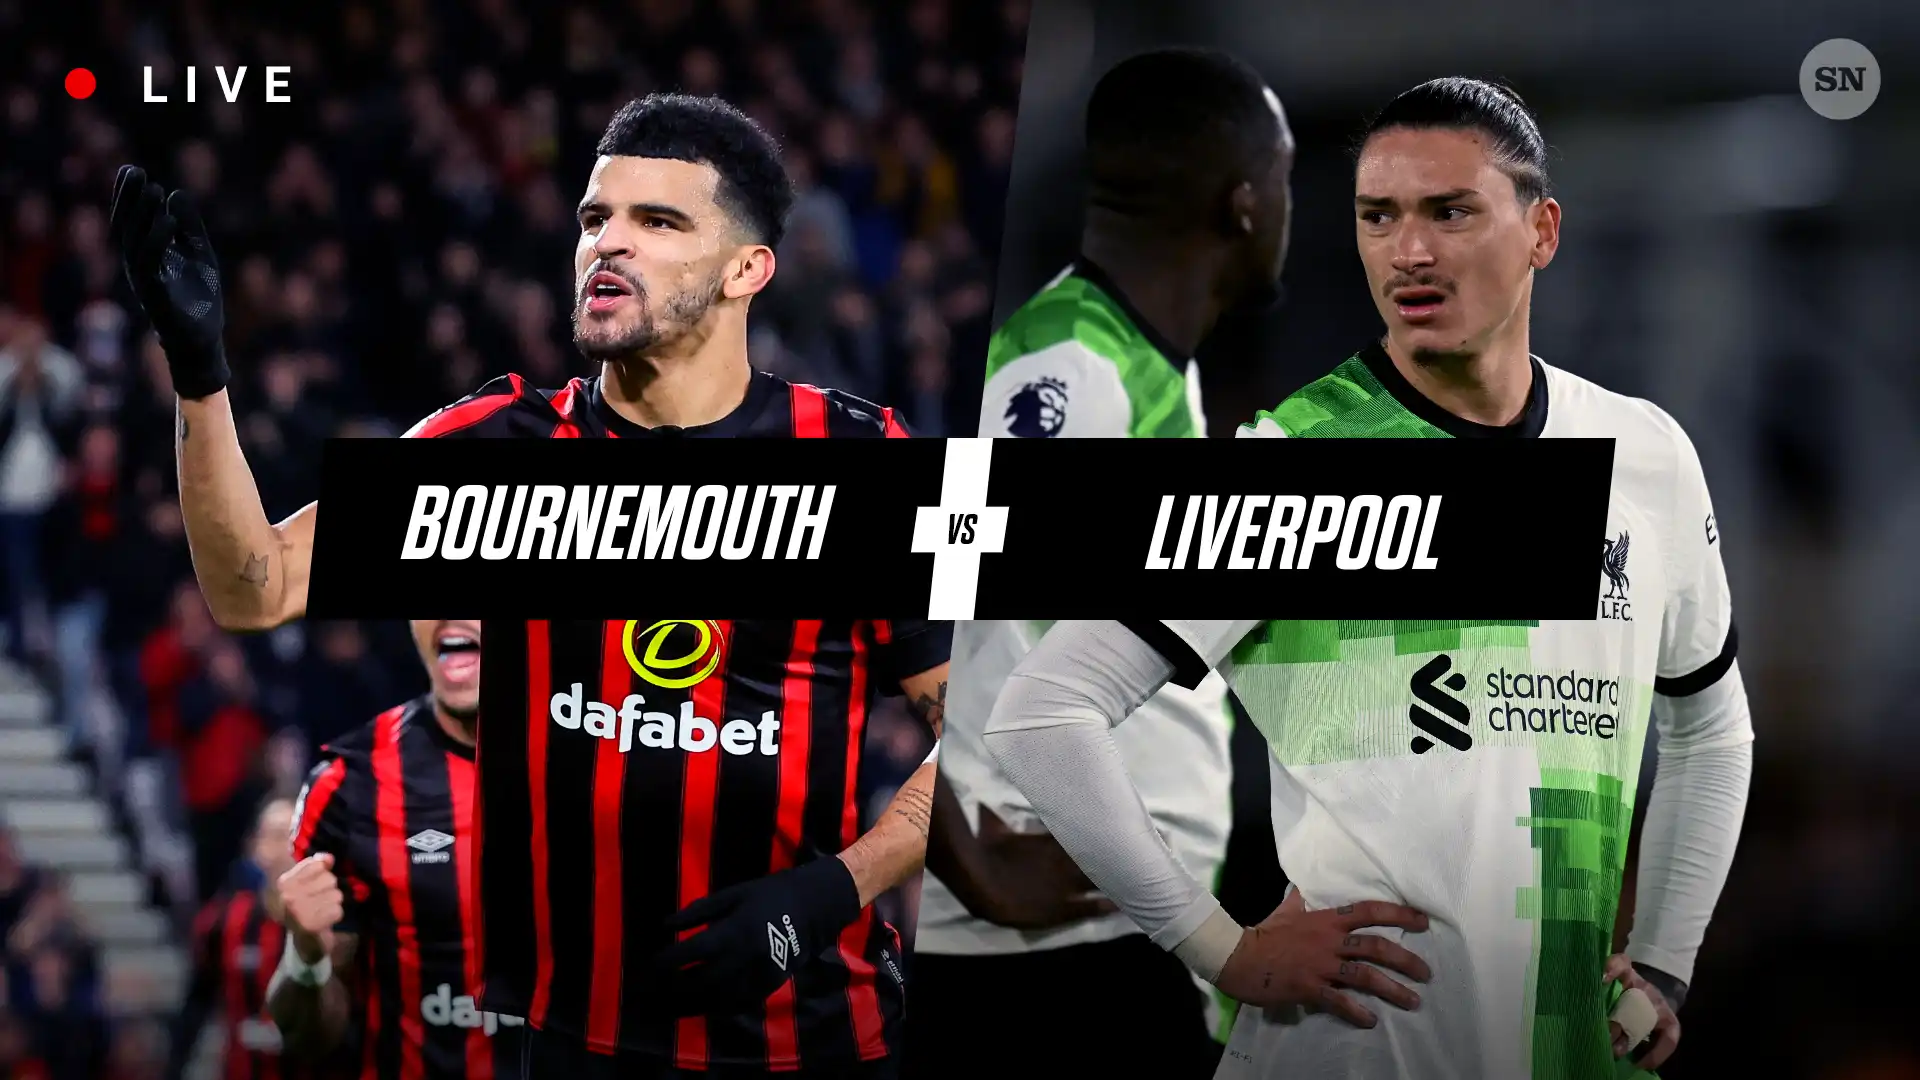 Bournemouth vs Liverpool: Live Score, Updates, Lineups, and Result Premier League